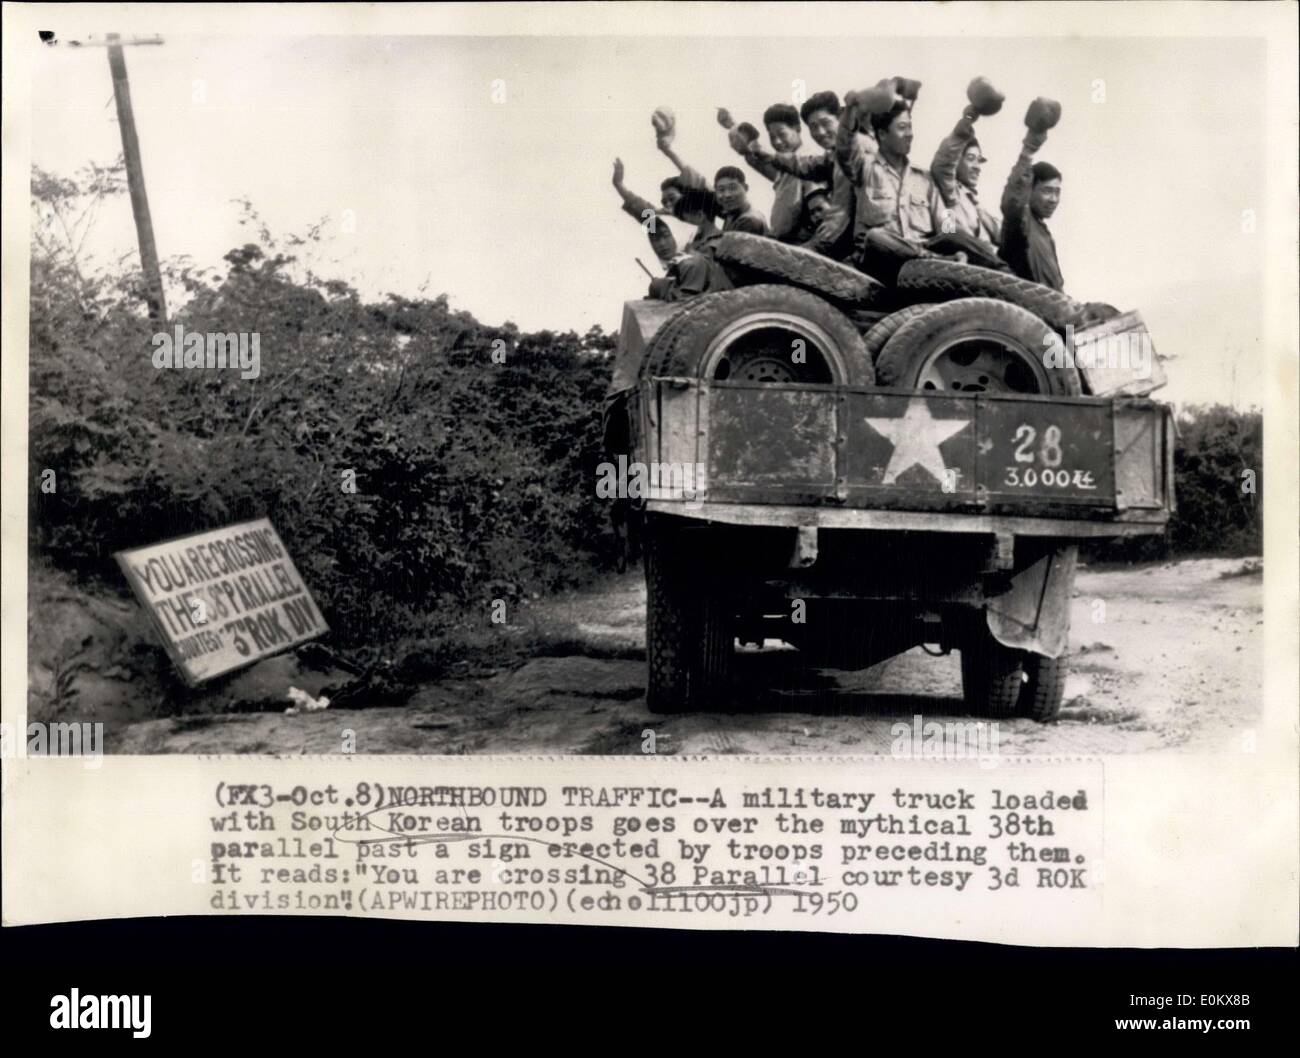 Oct. 08, 1950 - Northbound Traffic: A military truck loaded with South Korean troops goes over the mythical 38th parallel past a sign erected by troops presiding them. It reads: ''You are crossing 38 Parallel Courtesy 3d Rok Division. Stock Photo